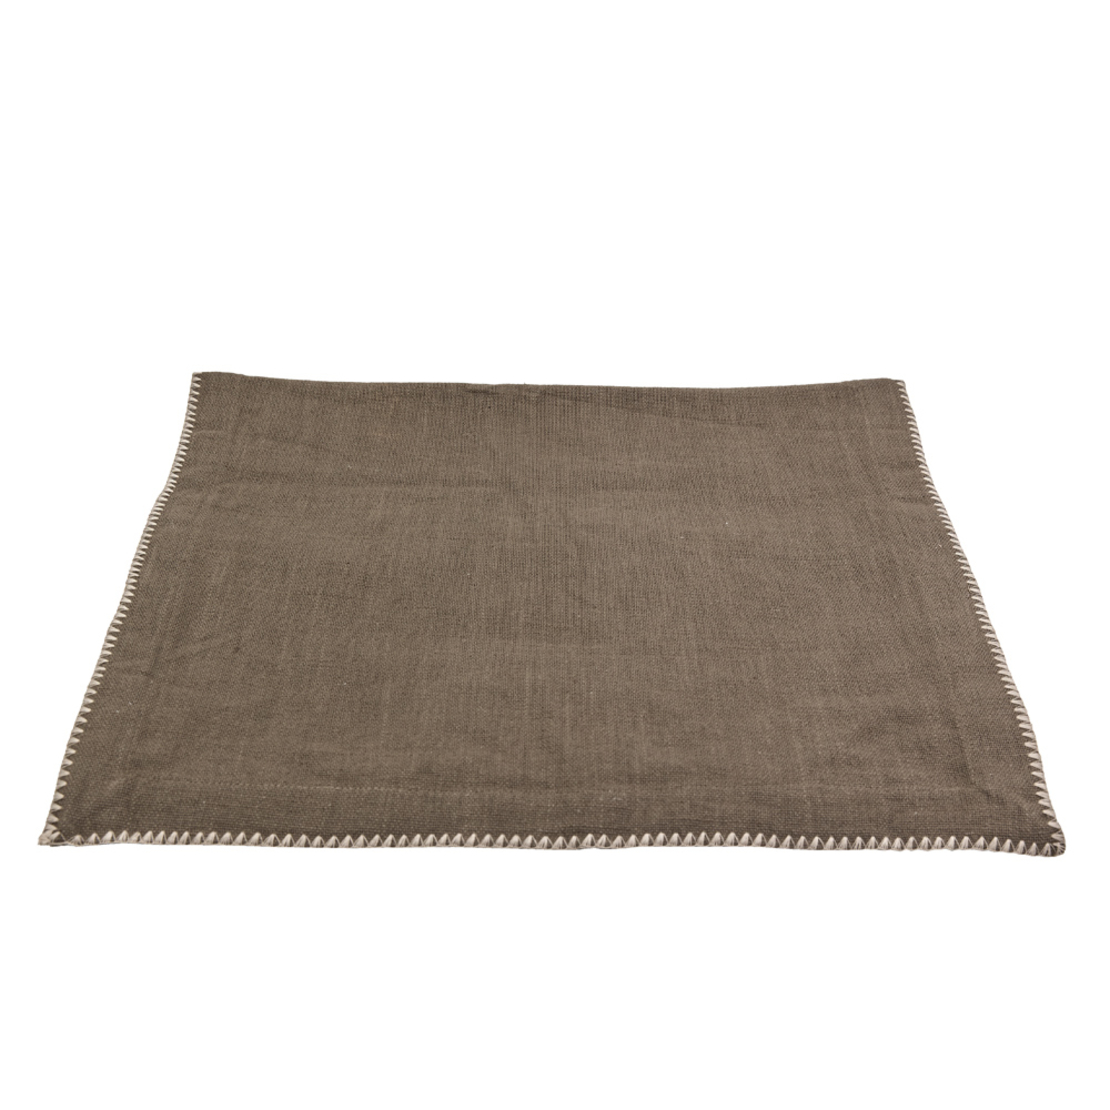 ASHEN OLIVE RUNNER COTTON OLIVE GREEN 180x40 IN